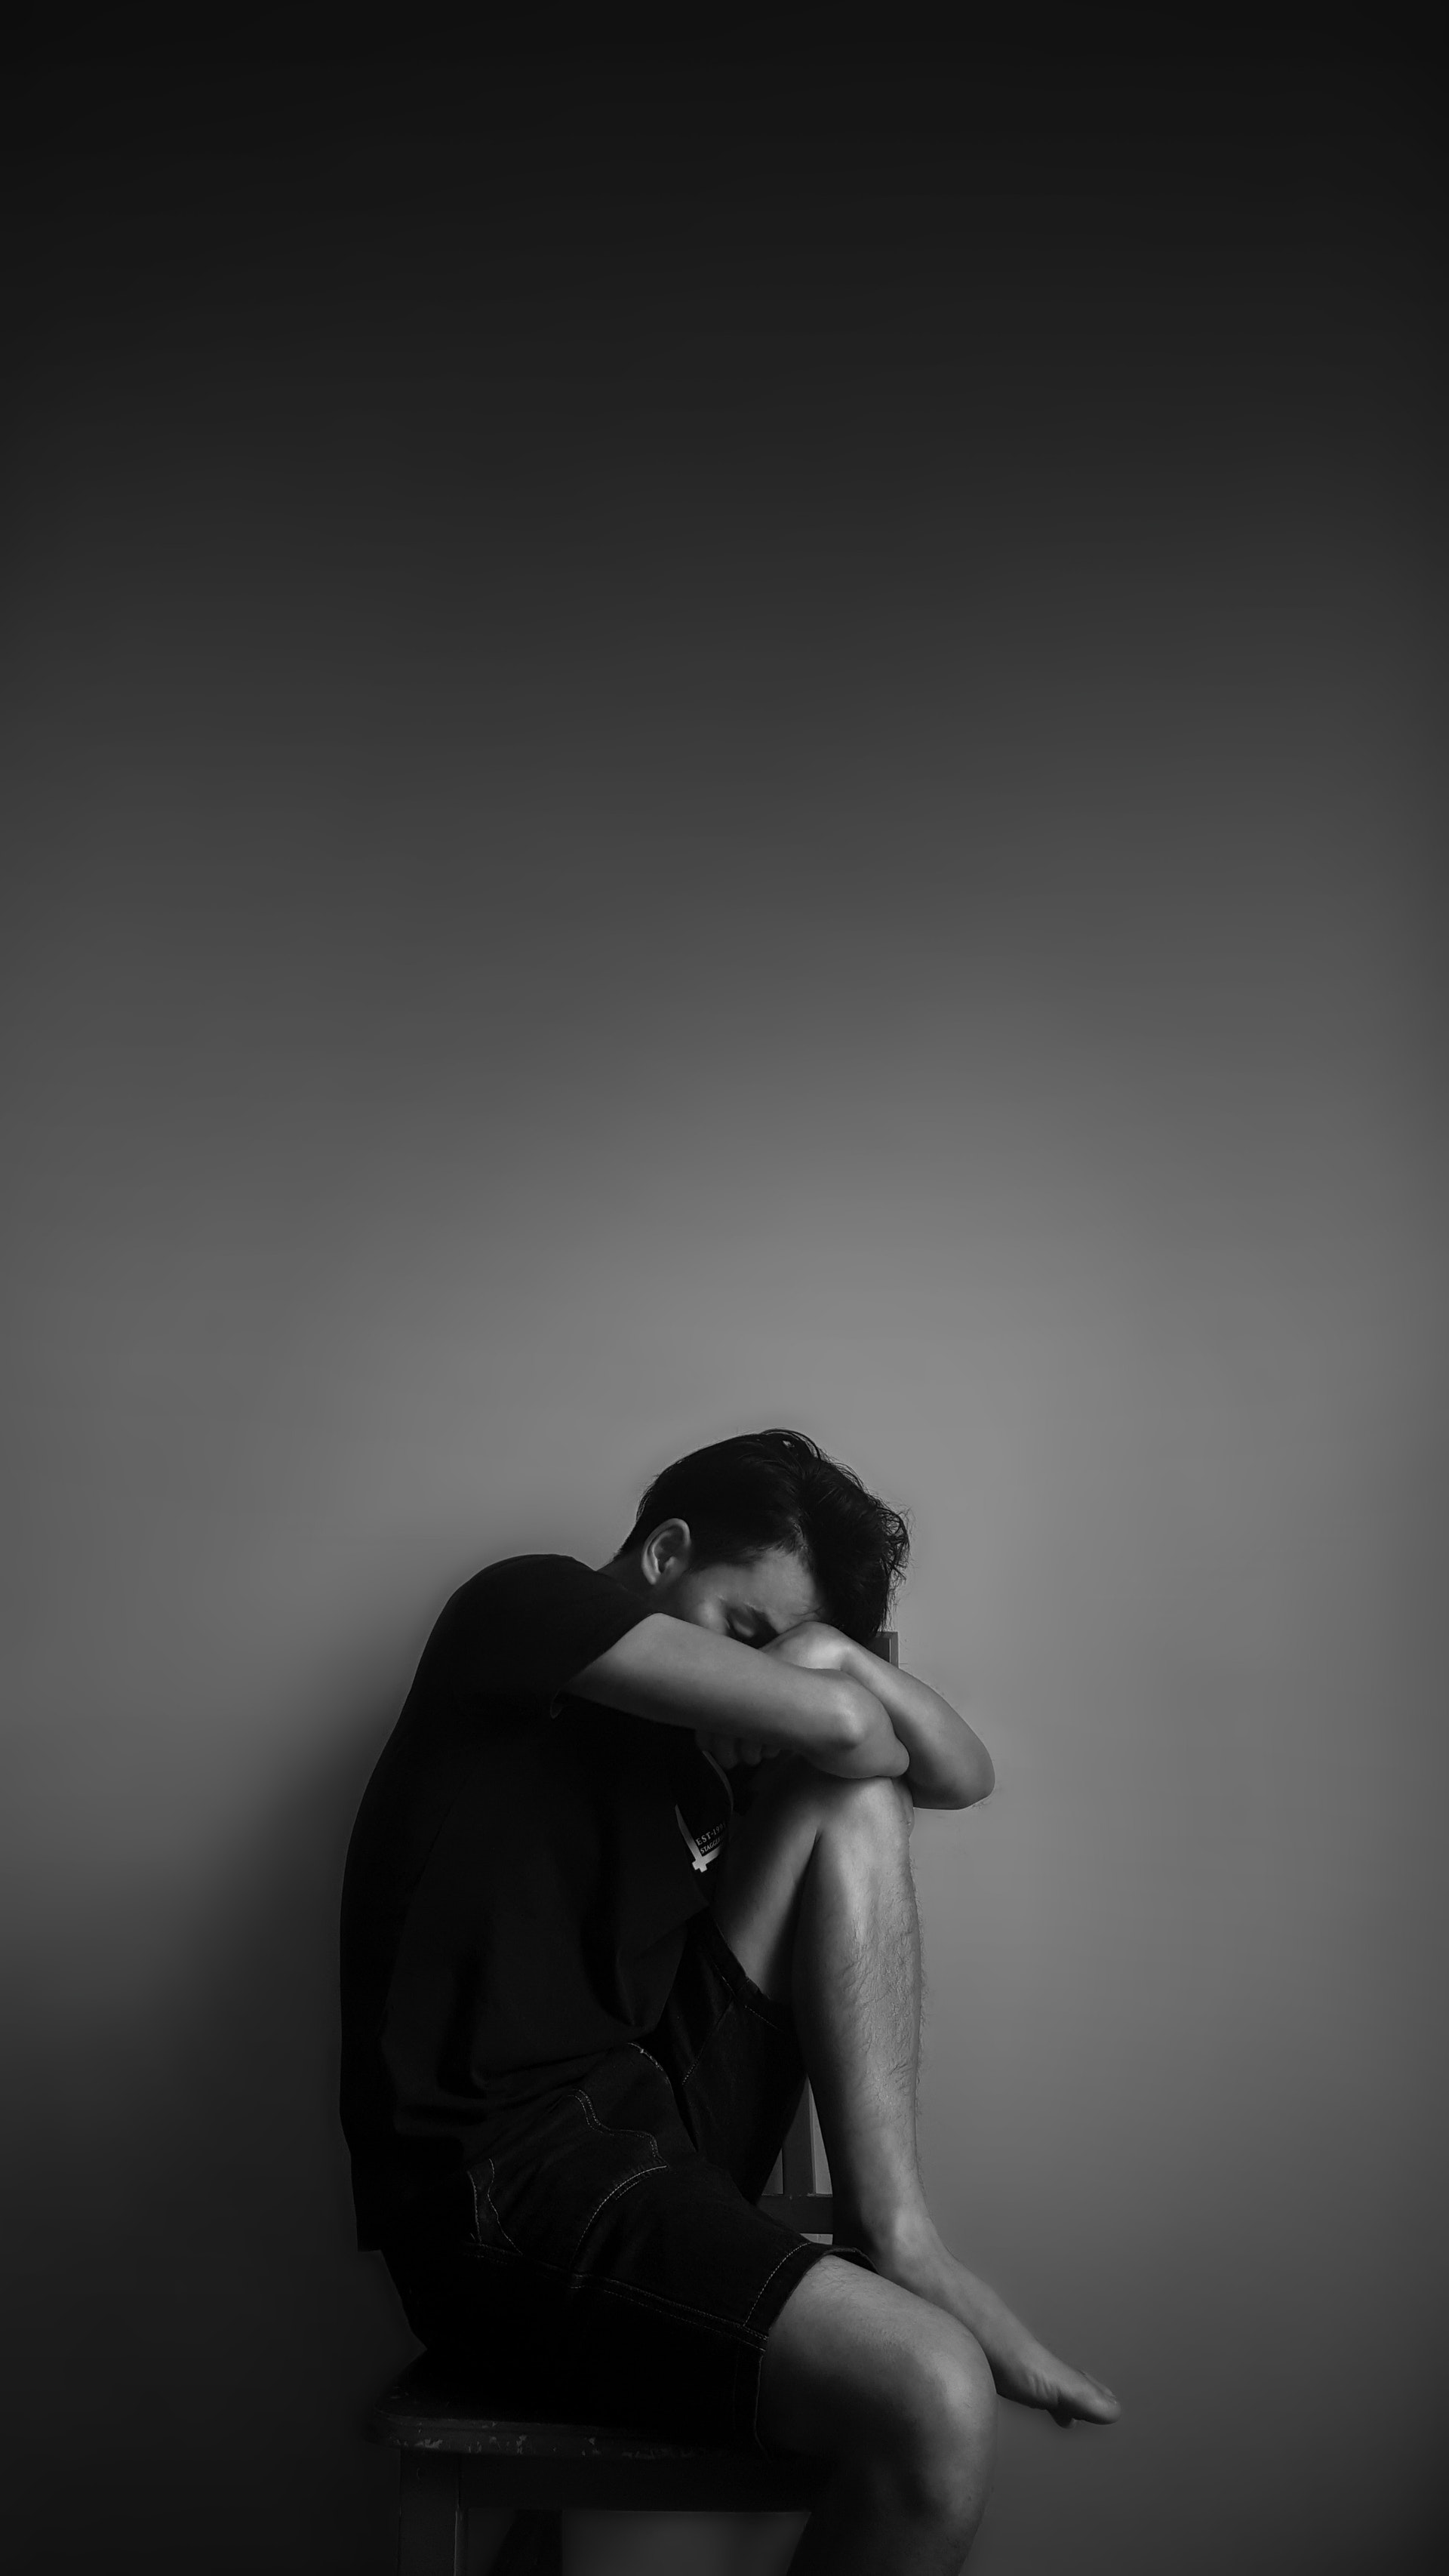 Photo by Pixabay: https://www.pexels.com/photo/grayscale-photography-of-man-sitting-beside-wall-207129/